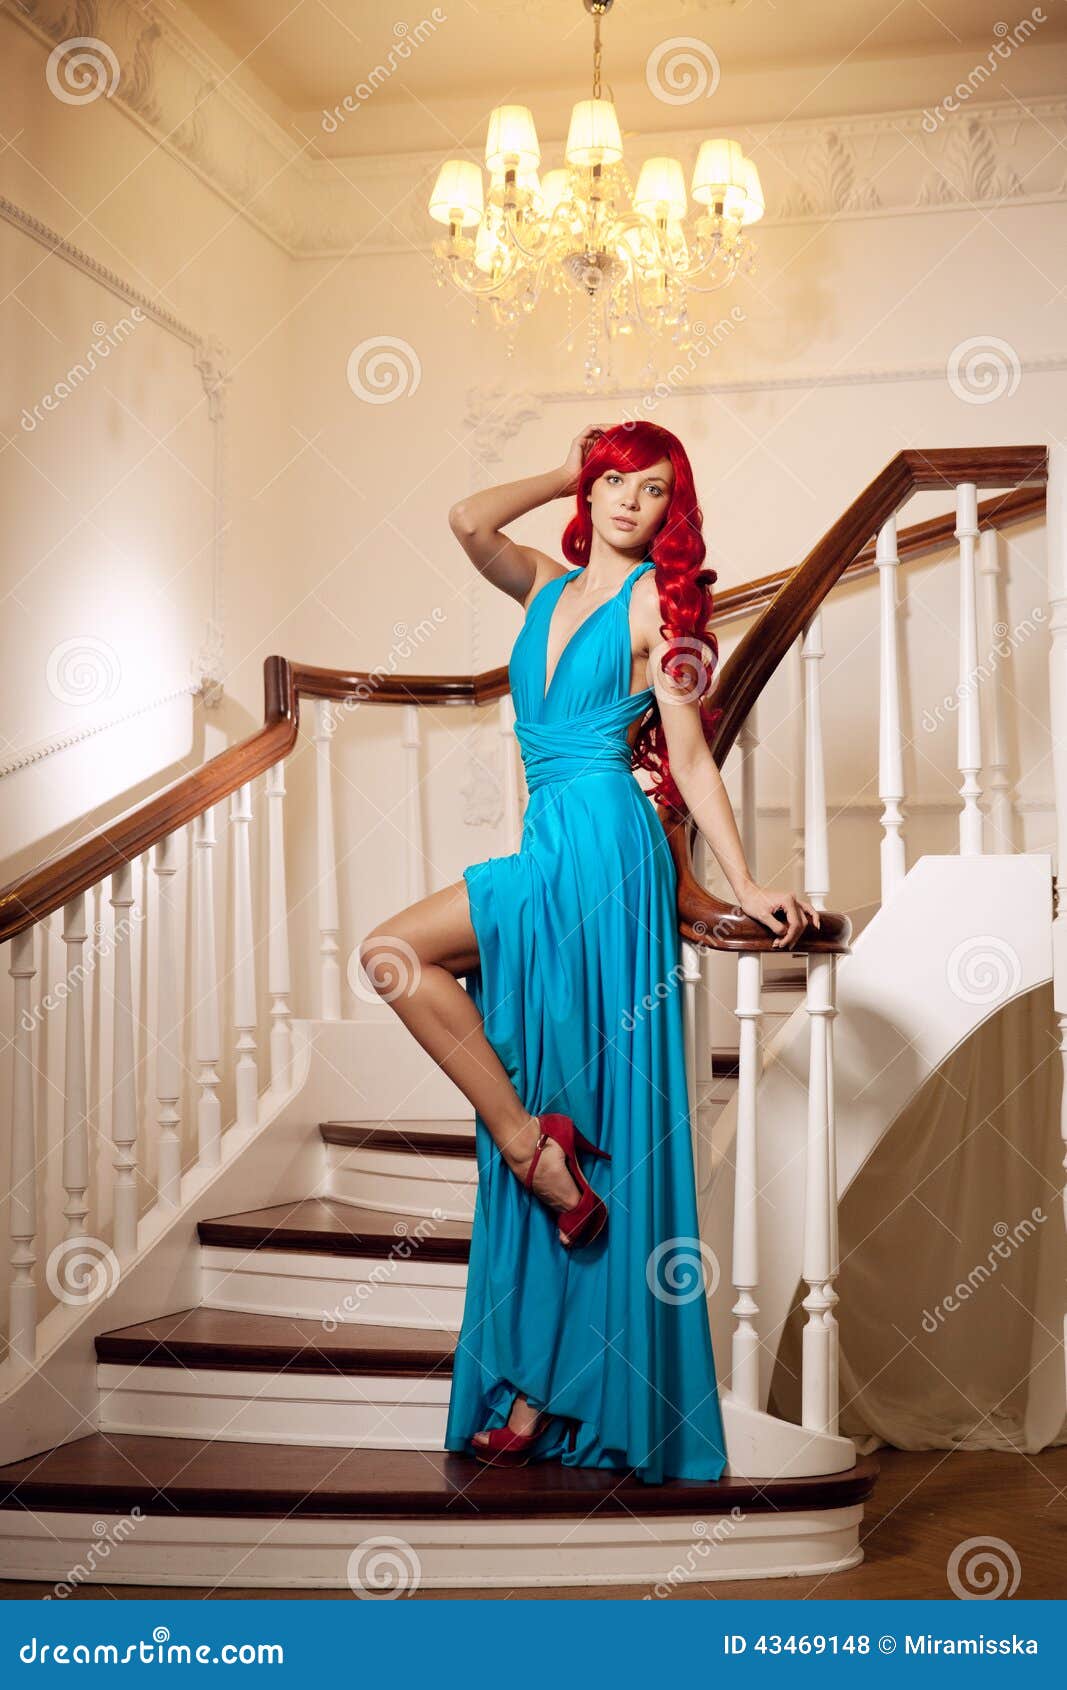 Young Woman With Luxurious Long Beautiful Red Hair In A 